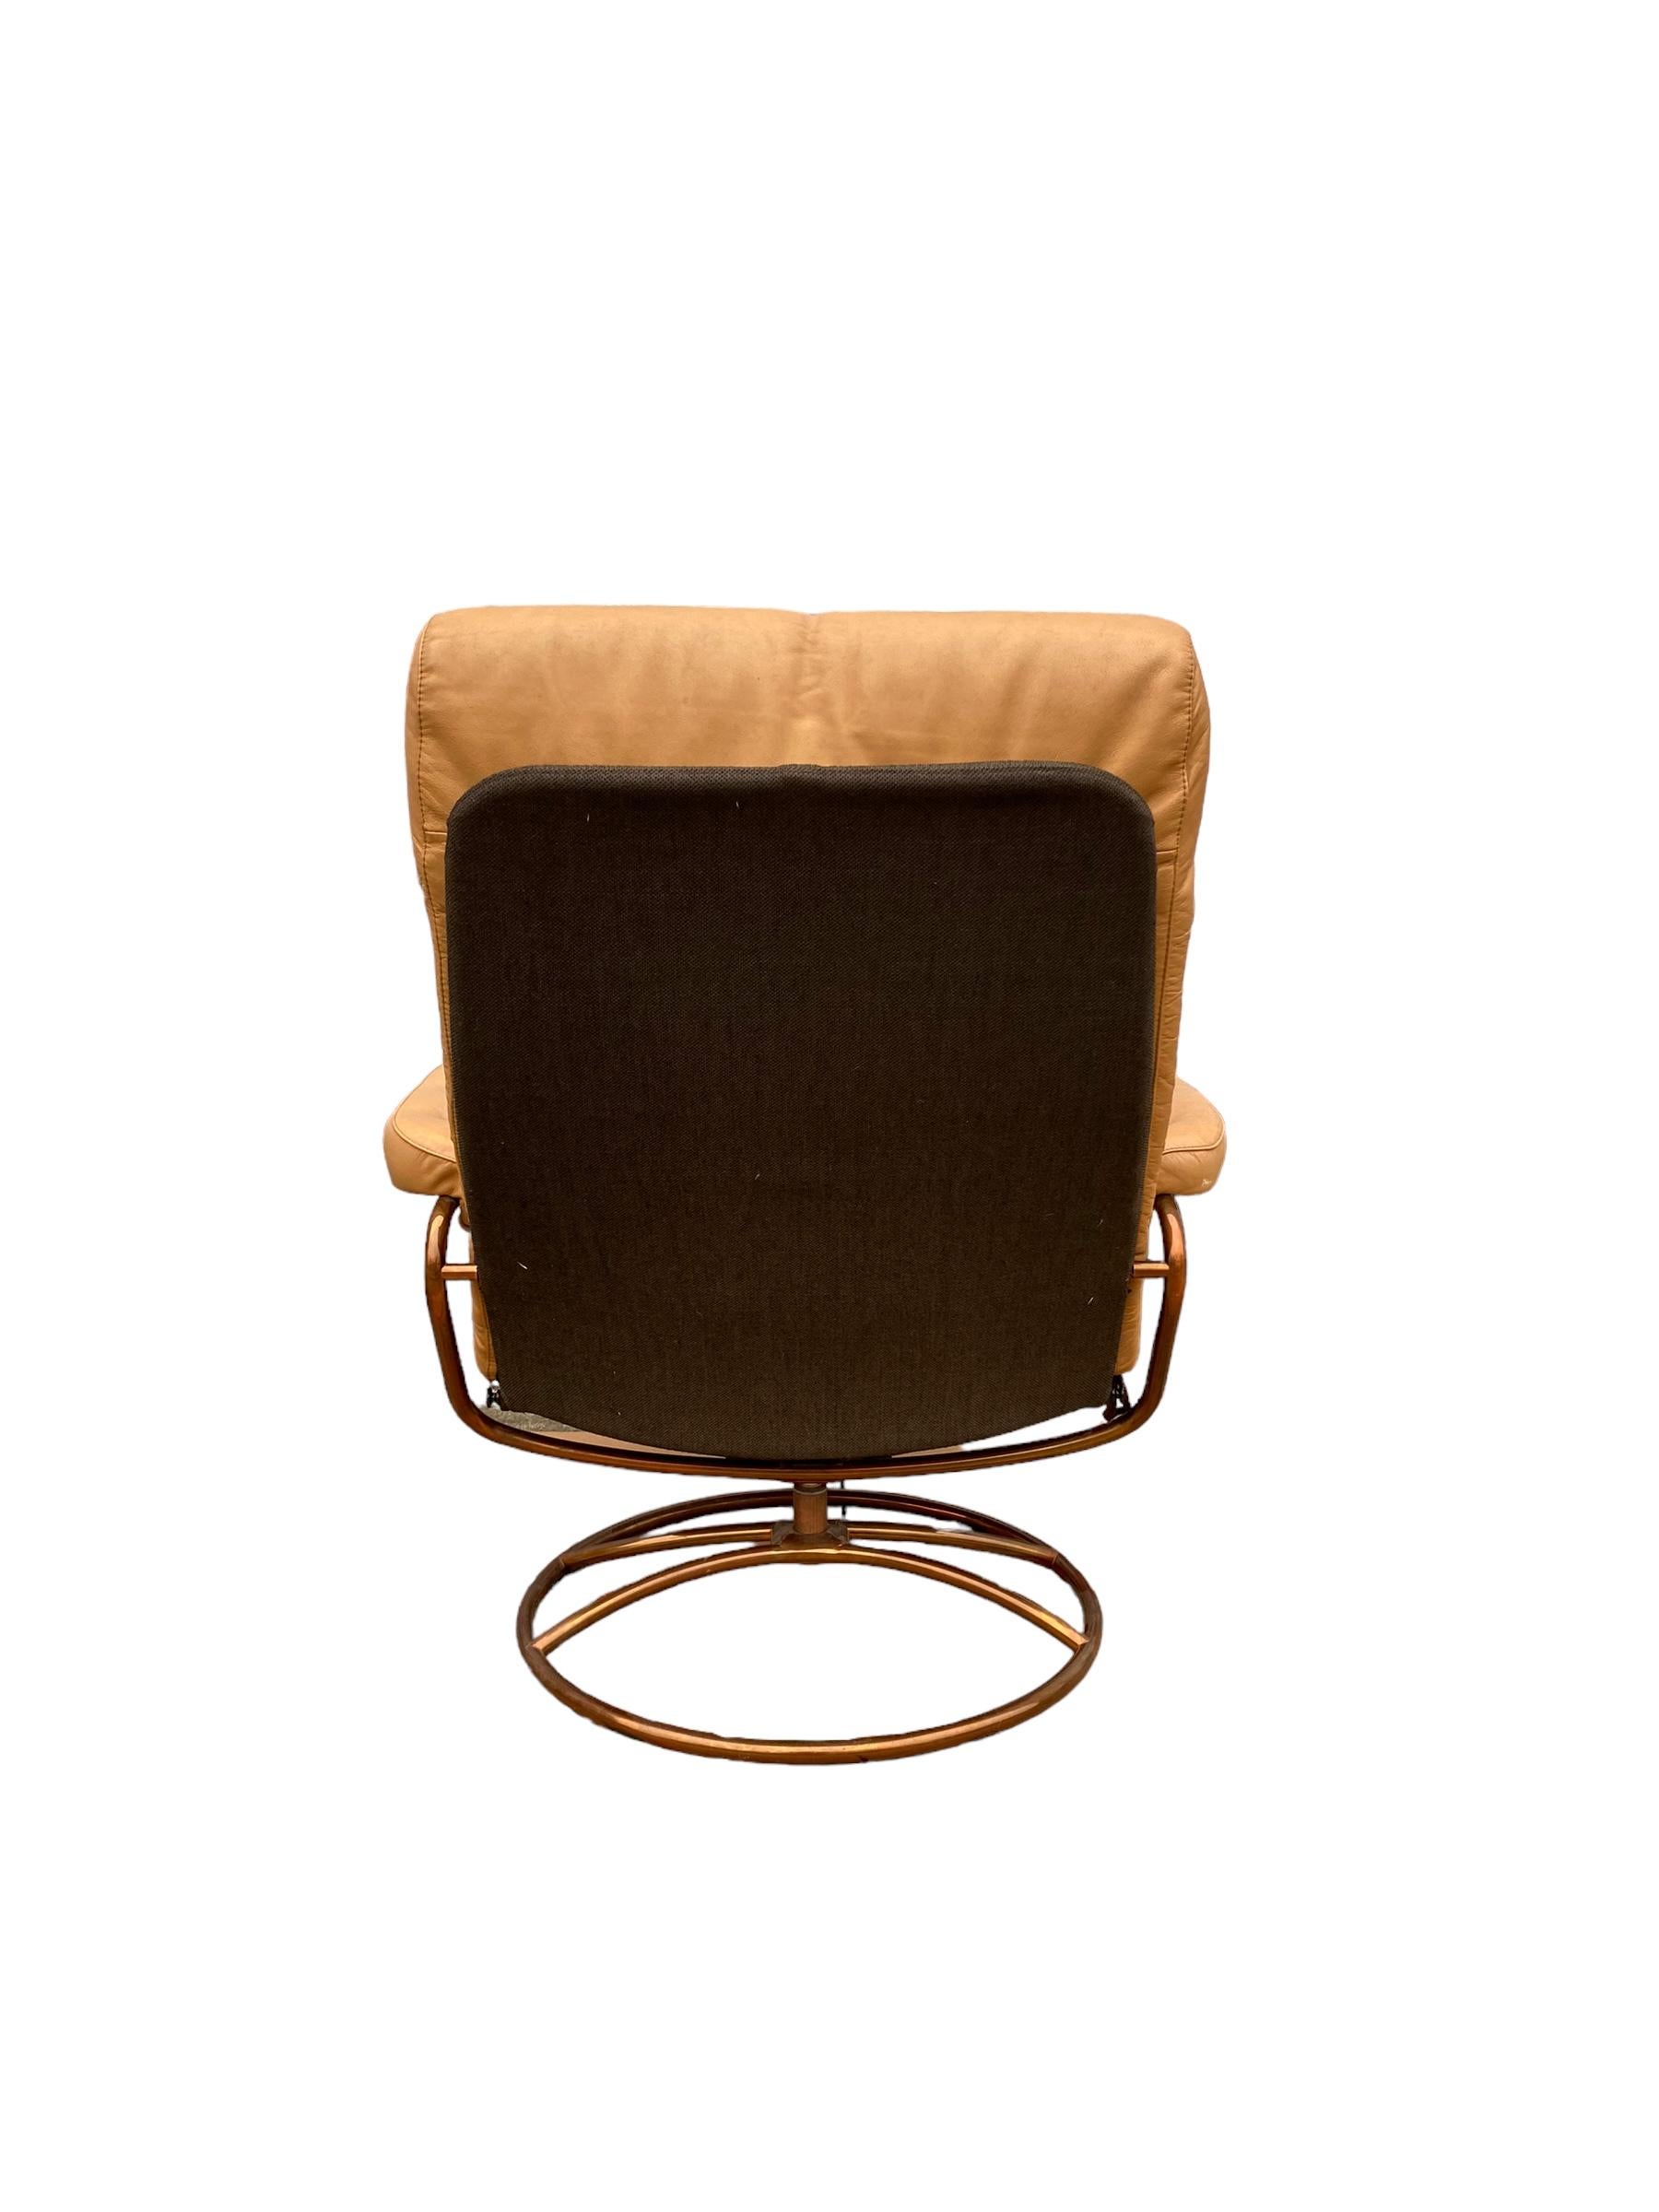 20th Century Ekornes Stressless Reclining Lounge Chair and Ottoman in Cream with Copper Frame